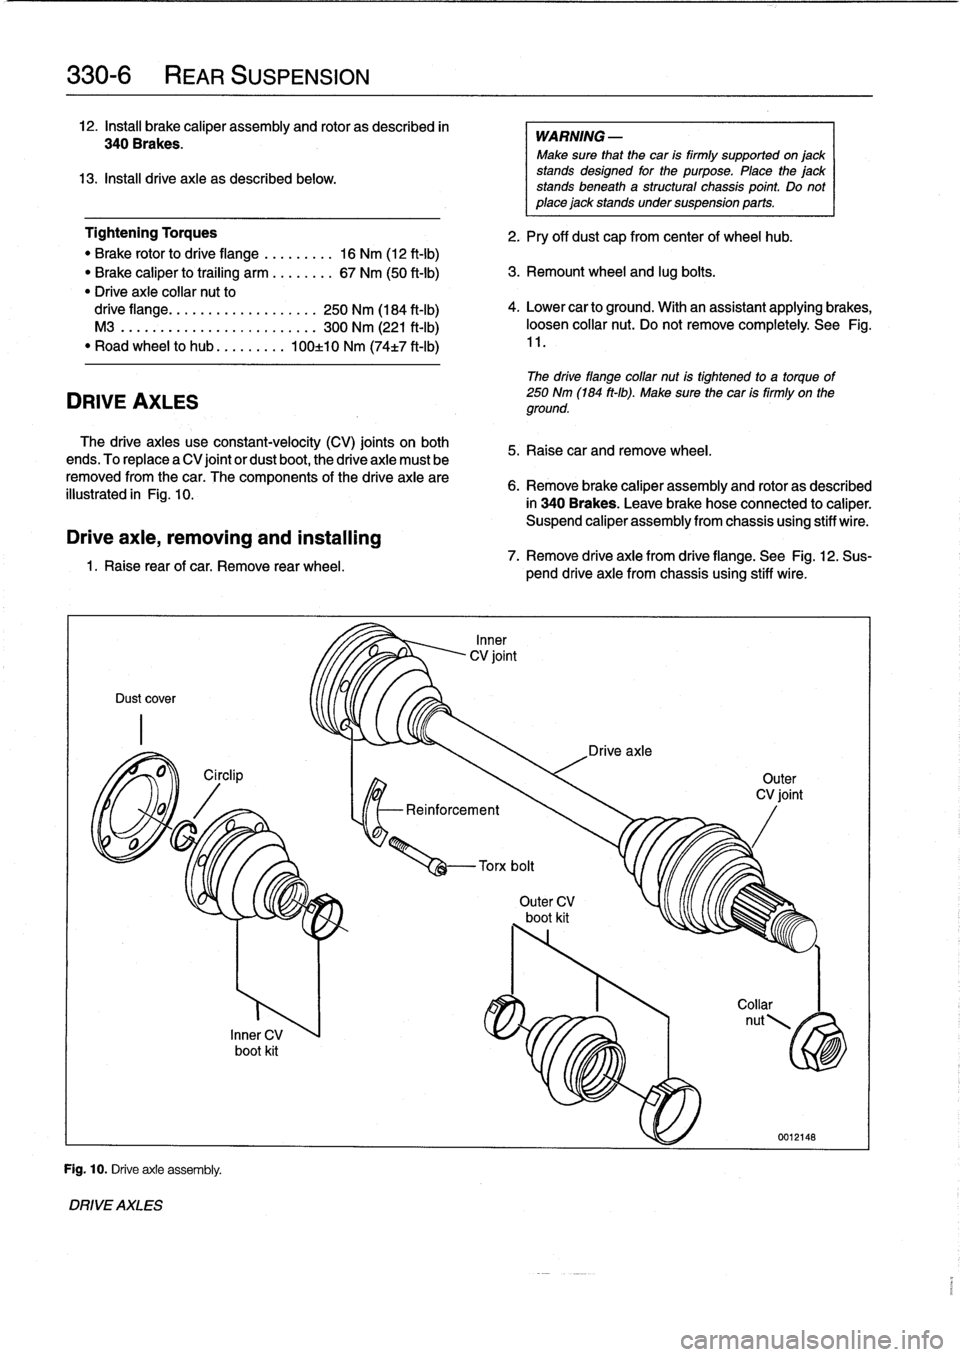 BMW 318i 1994 E36 User Guide 
330-
6

	

REAR
SUSPENSION

12
.
Install
brake
caliper
assembly
and
rotor
as
described
in

340Brakes
.

13
.
Install
drive
axie
as
described
below
.

Tightening
Torques

"
Brake
rotor
to
drive
flange